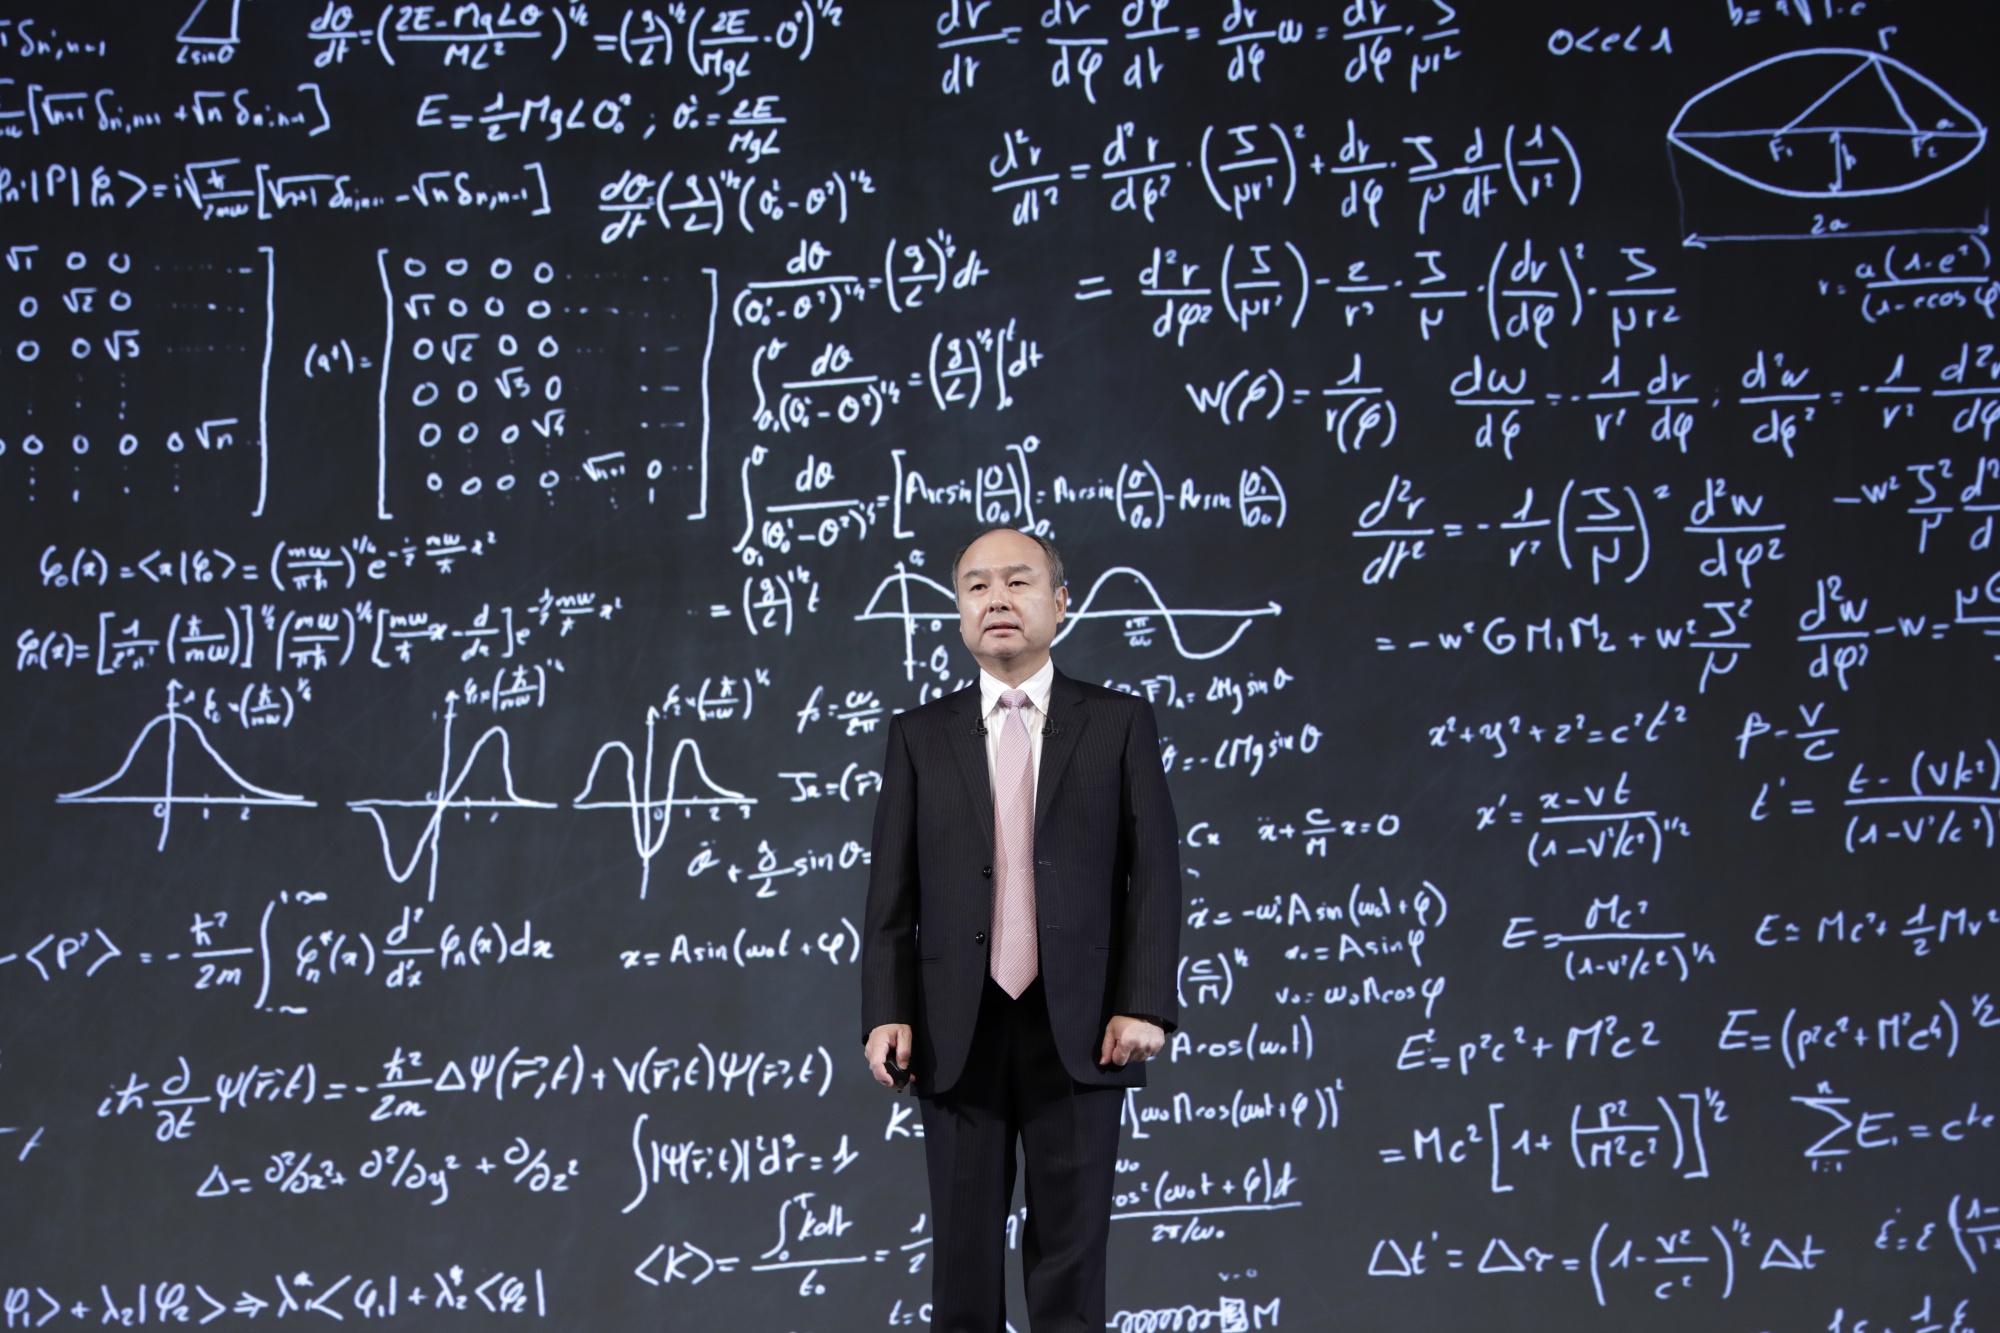 Masayoshi Son stands in front of the screen showing equations during a news conference in Feb. 2019.